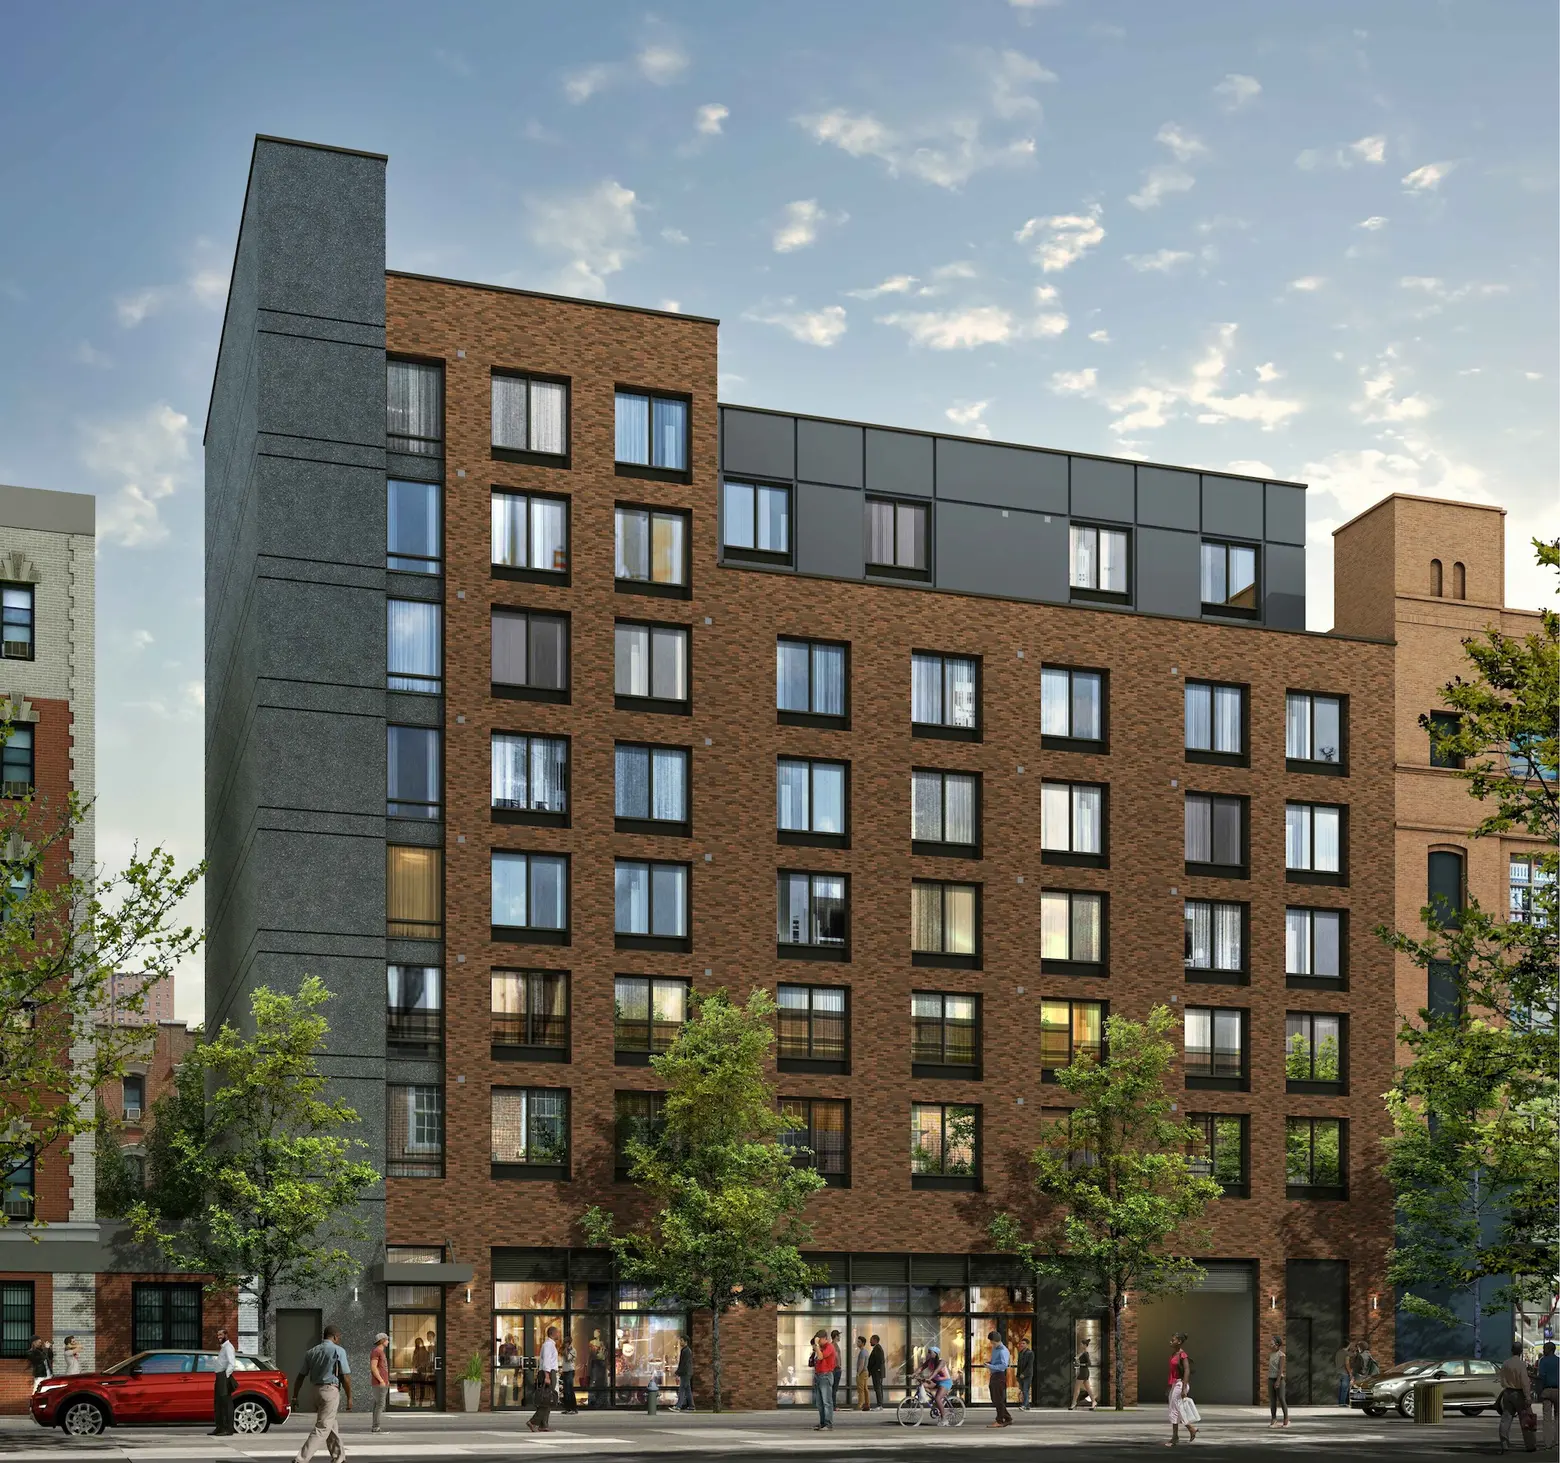 44 affordable senior apartments available at new rental in Williamsburg